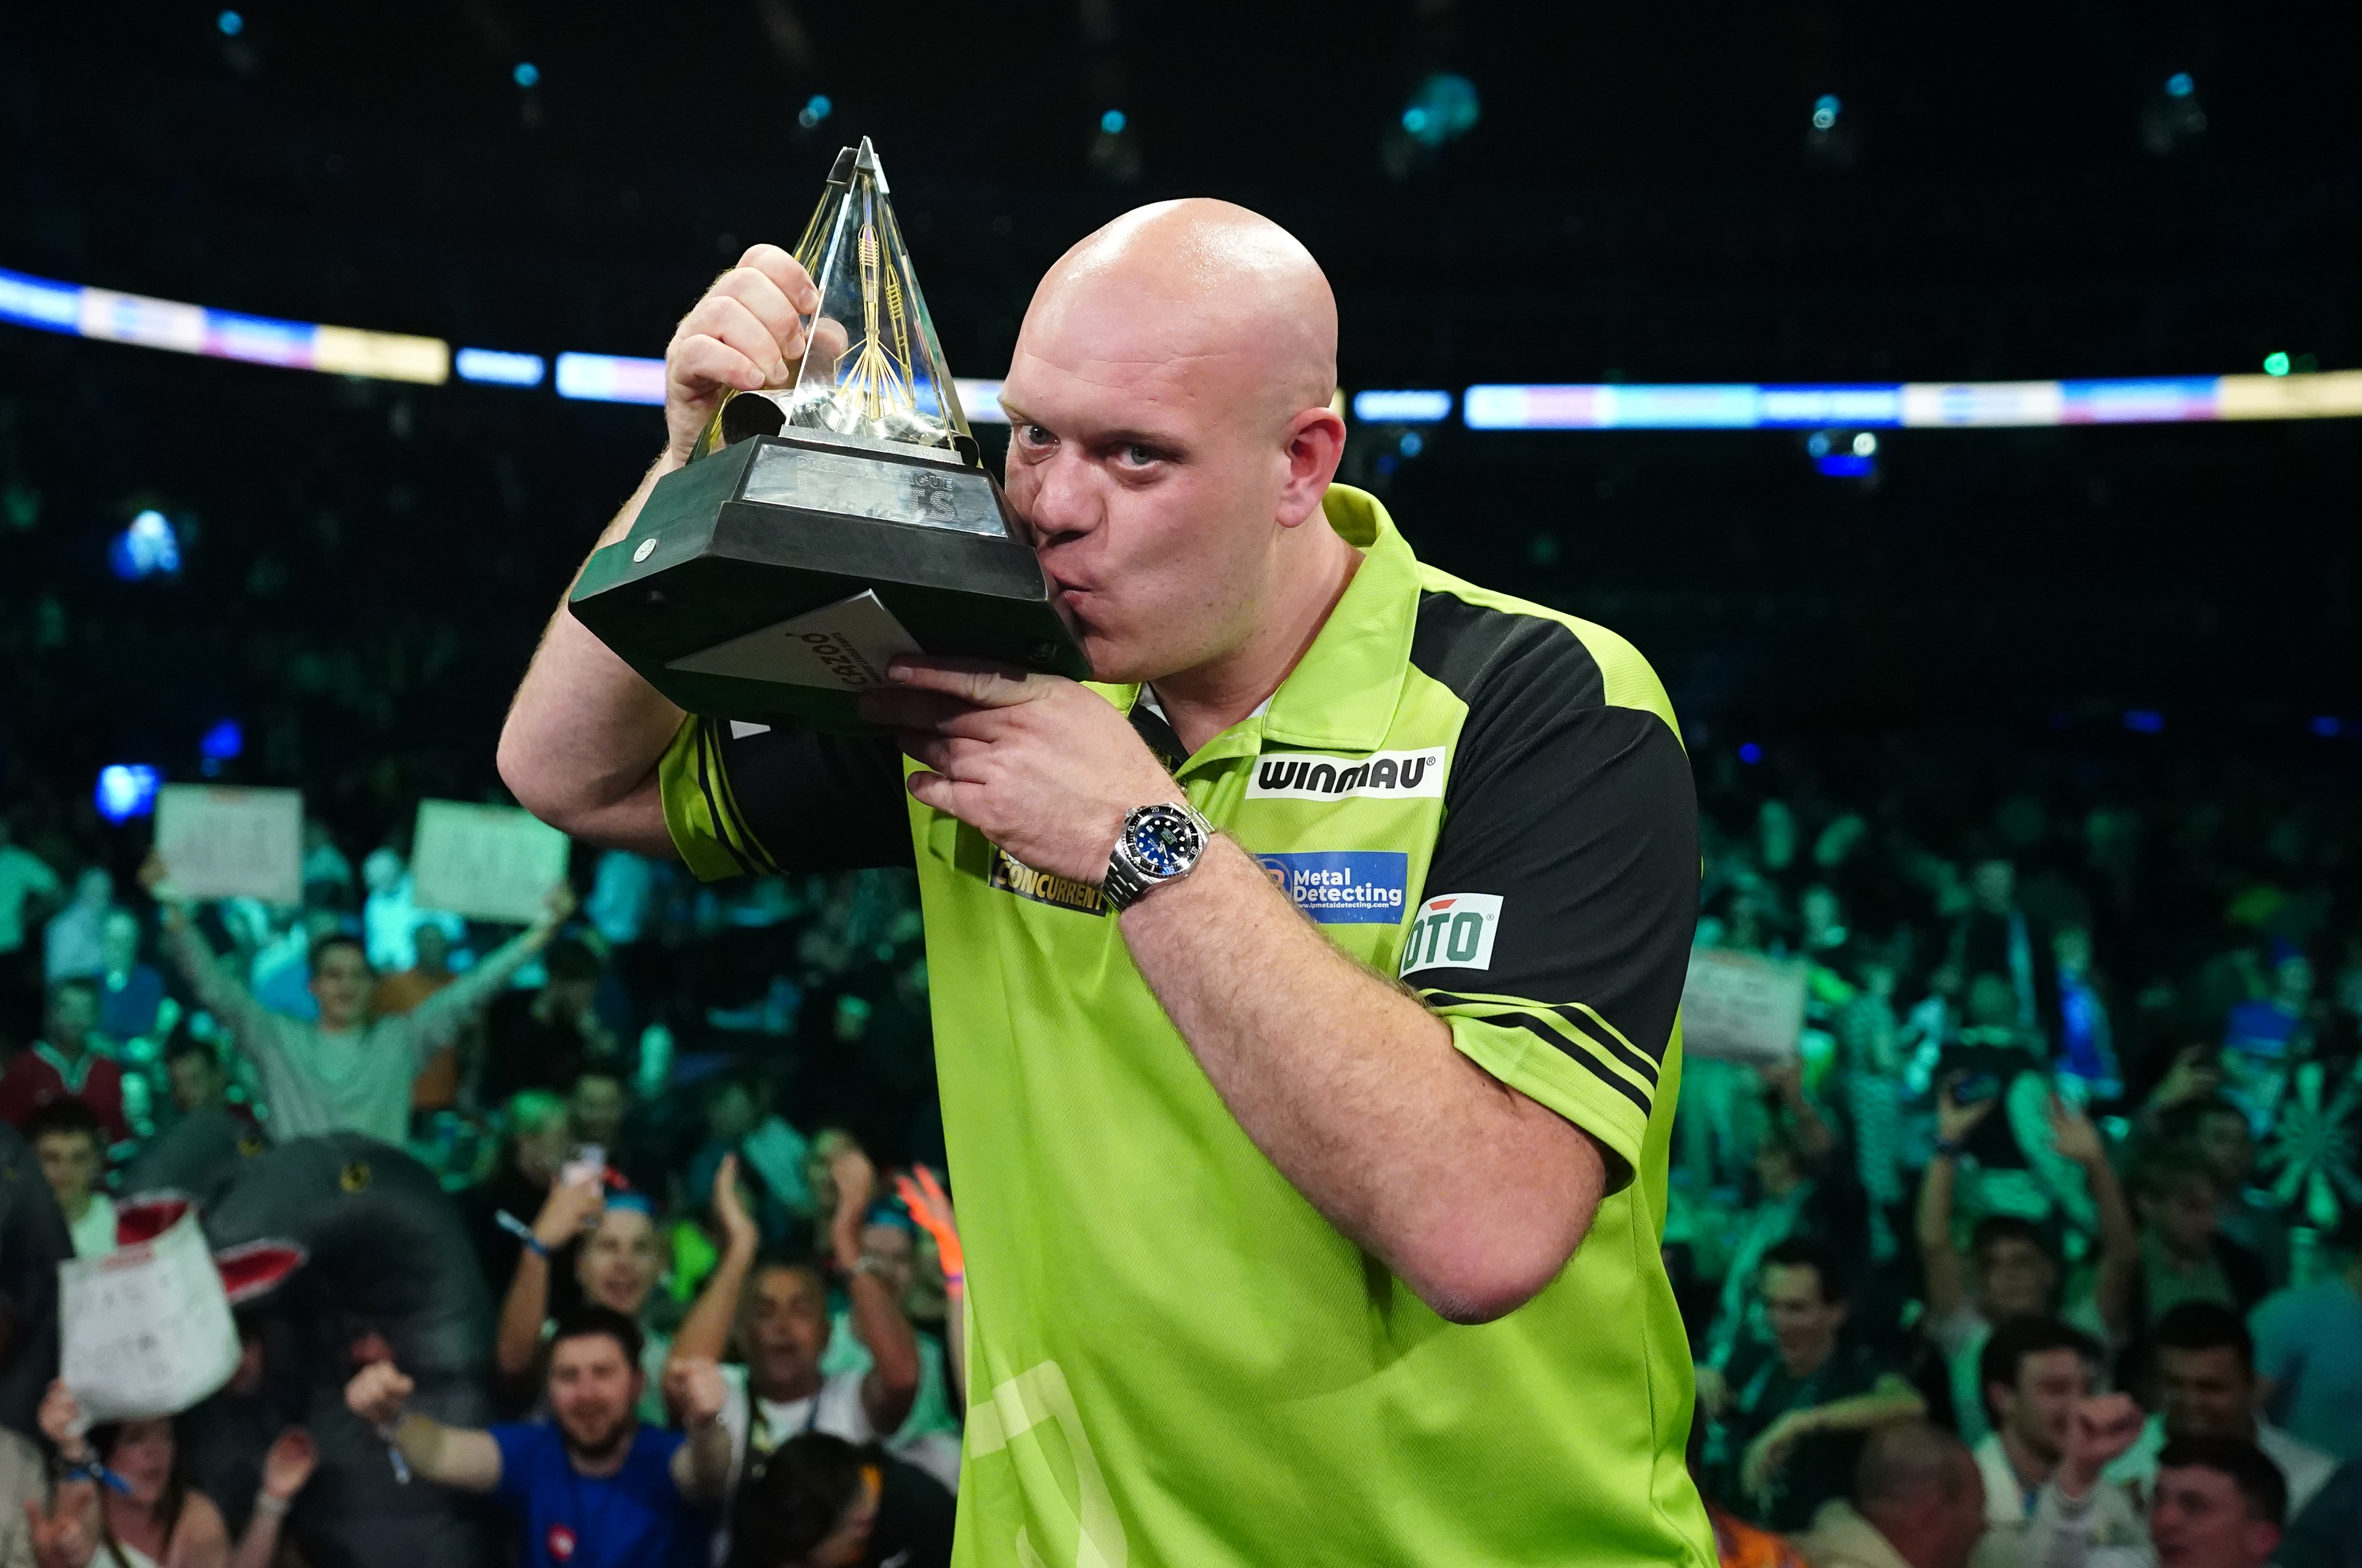 Michael van Gerwen has won the Premier League Darts a record SEVEN times - in 2013, 2016, 2017, 2018, 2019, 2022 and 2023